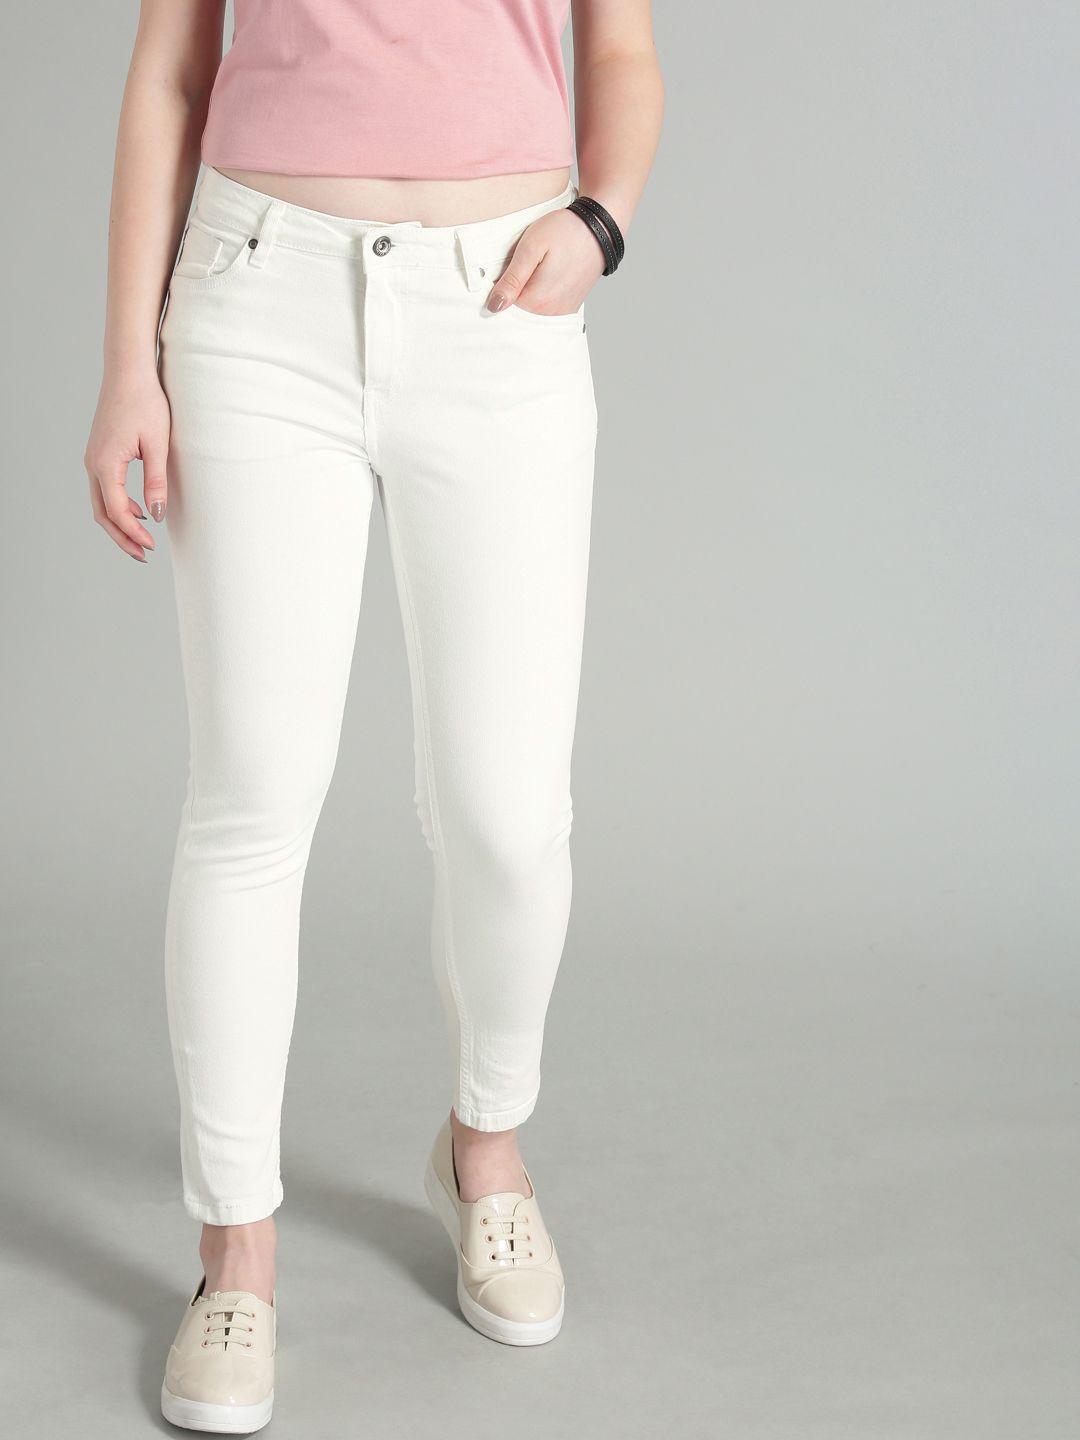 the roadster lifestyle co women white skinny fit mid-rise clean look stretchable cropped jeans